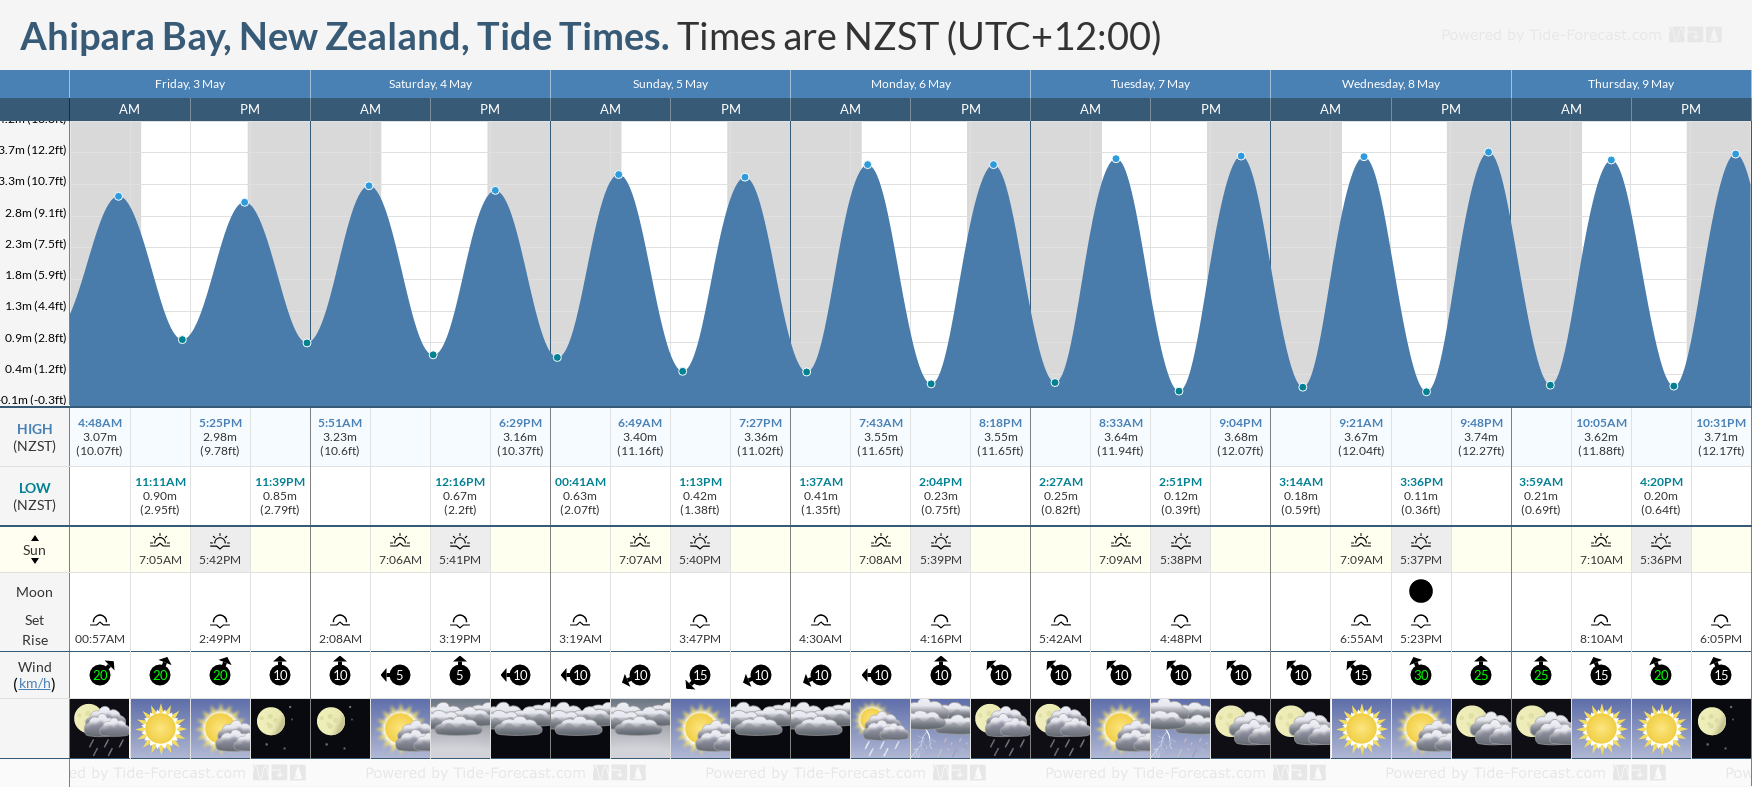 Ahipara Bay, New Zealand Tide Chart including high and low tide tide times for the next 7 days